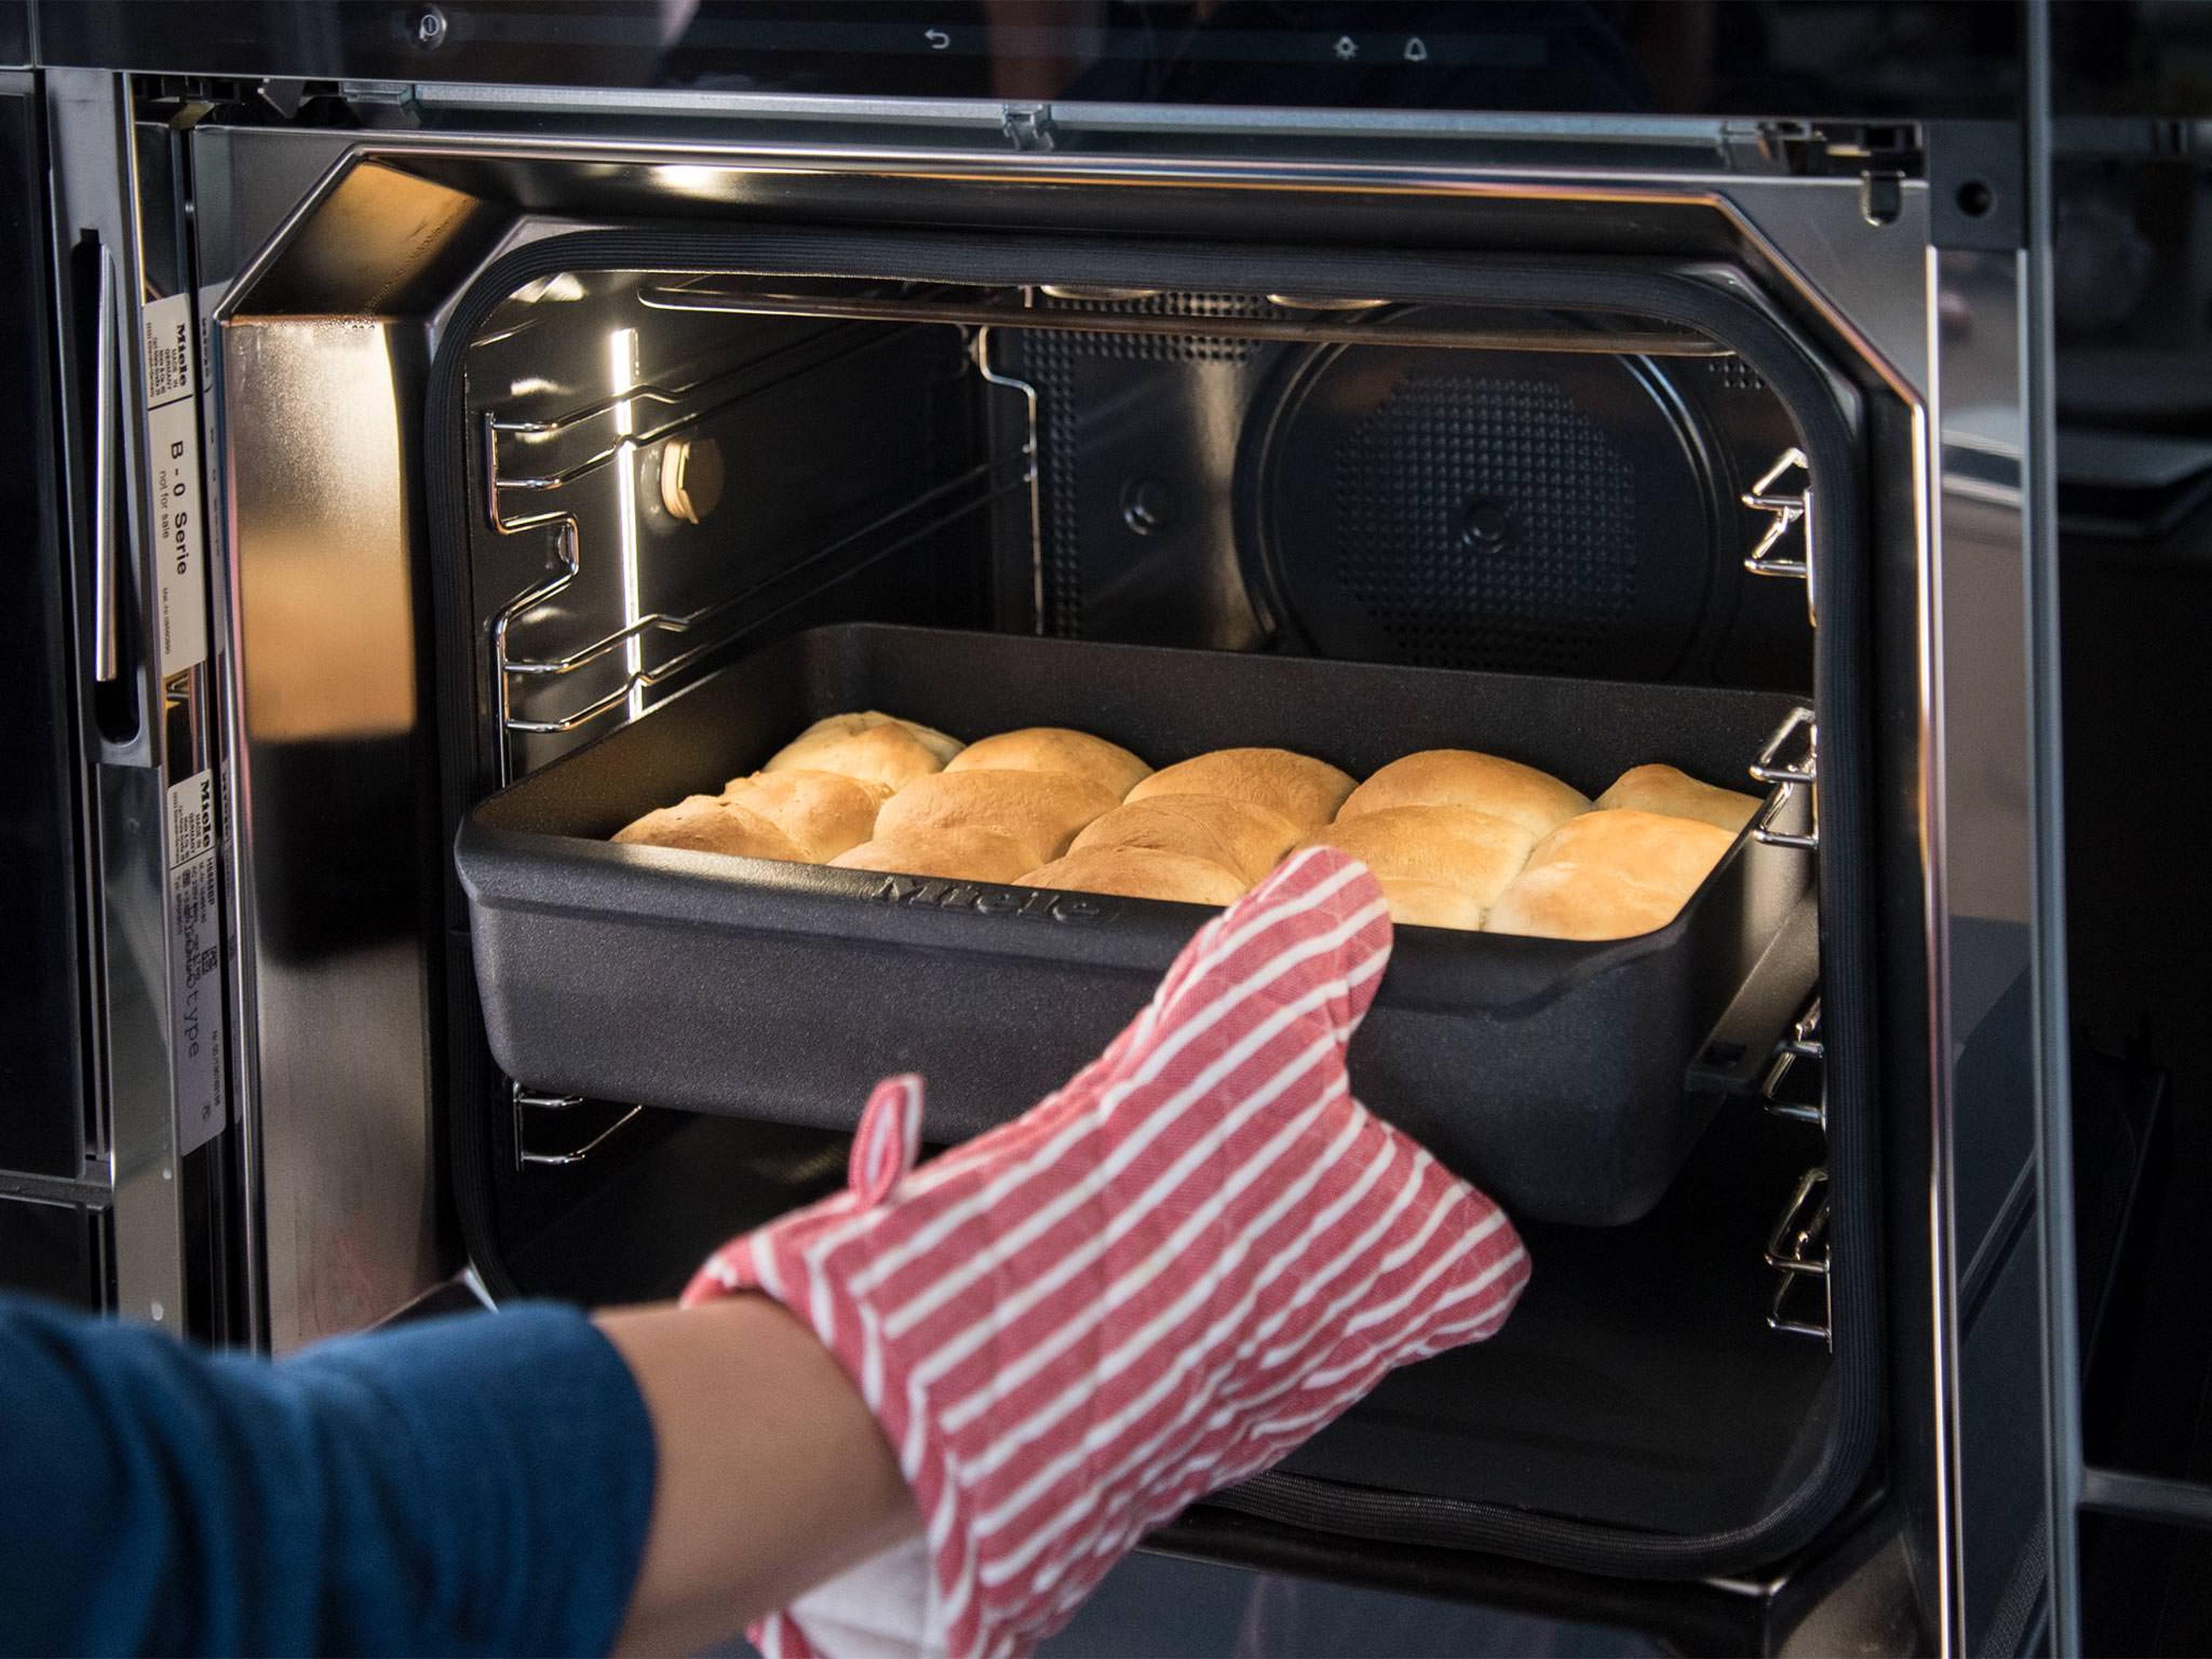 Cover pan with a damp kitchen towel and leave to rest for approx. 20 min. Start the automatic program for "dessert / filled sweet rolls," preheat dialog oven and transfer rolls to oven on level 2 after resting time, and bake for 24 min.